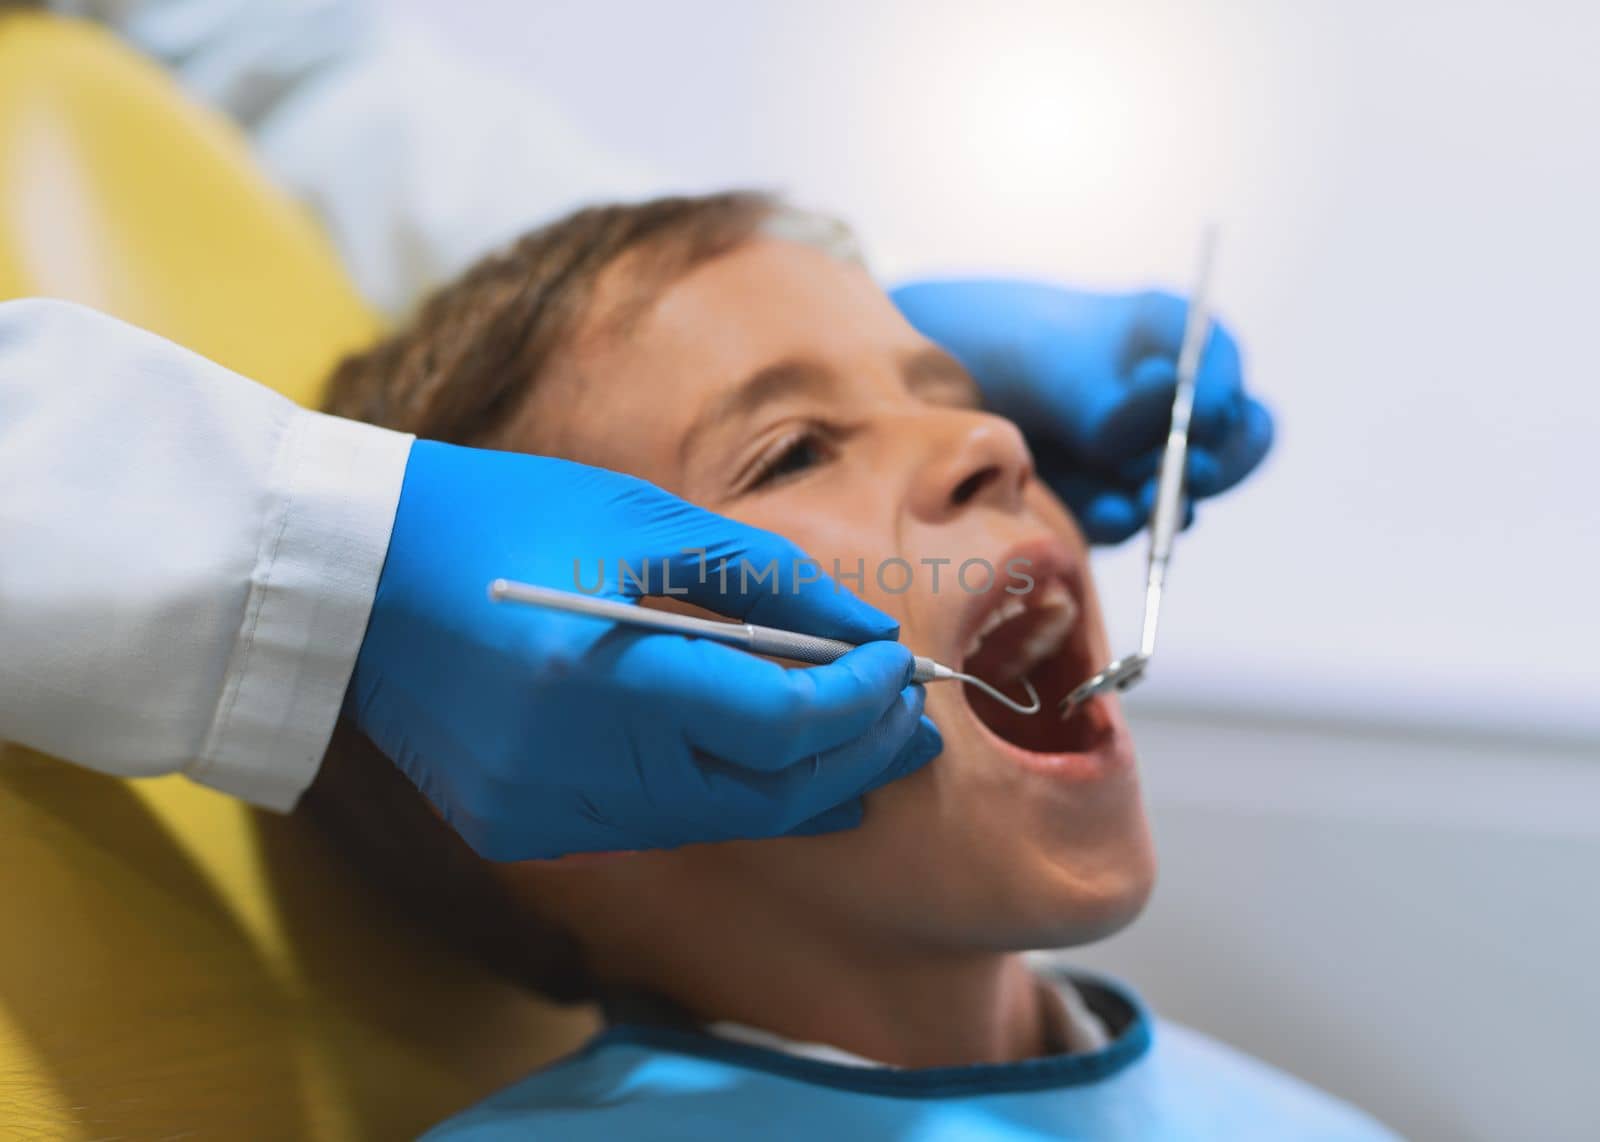 Everything looks in place. a young little boy lying down on a dentist chair while getting a checkup from the dentist